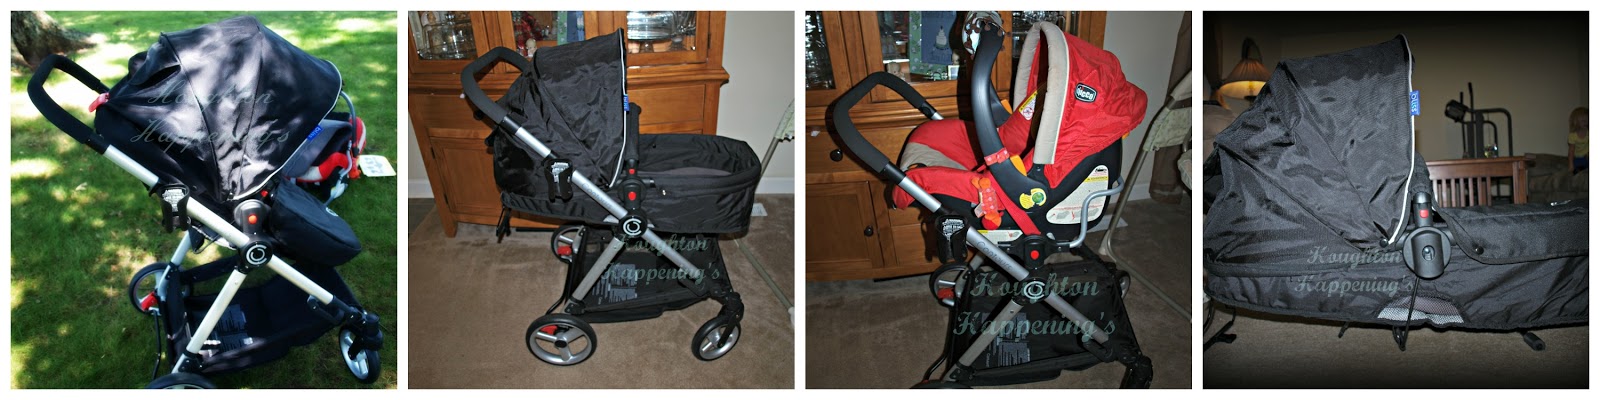 Houghton Happenings: Contours Bliss 4-in-1 Stroller System ...